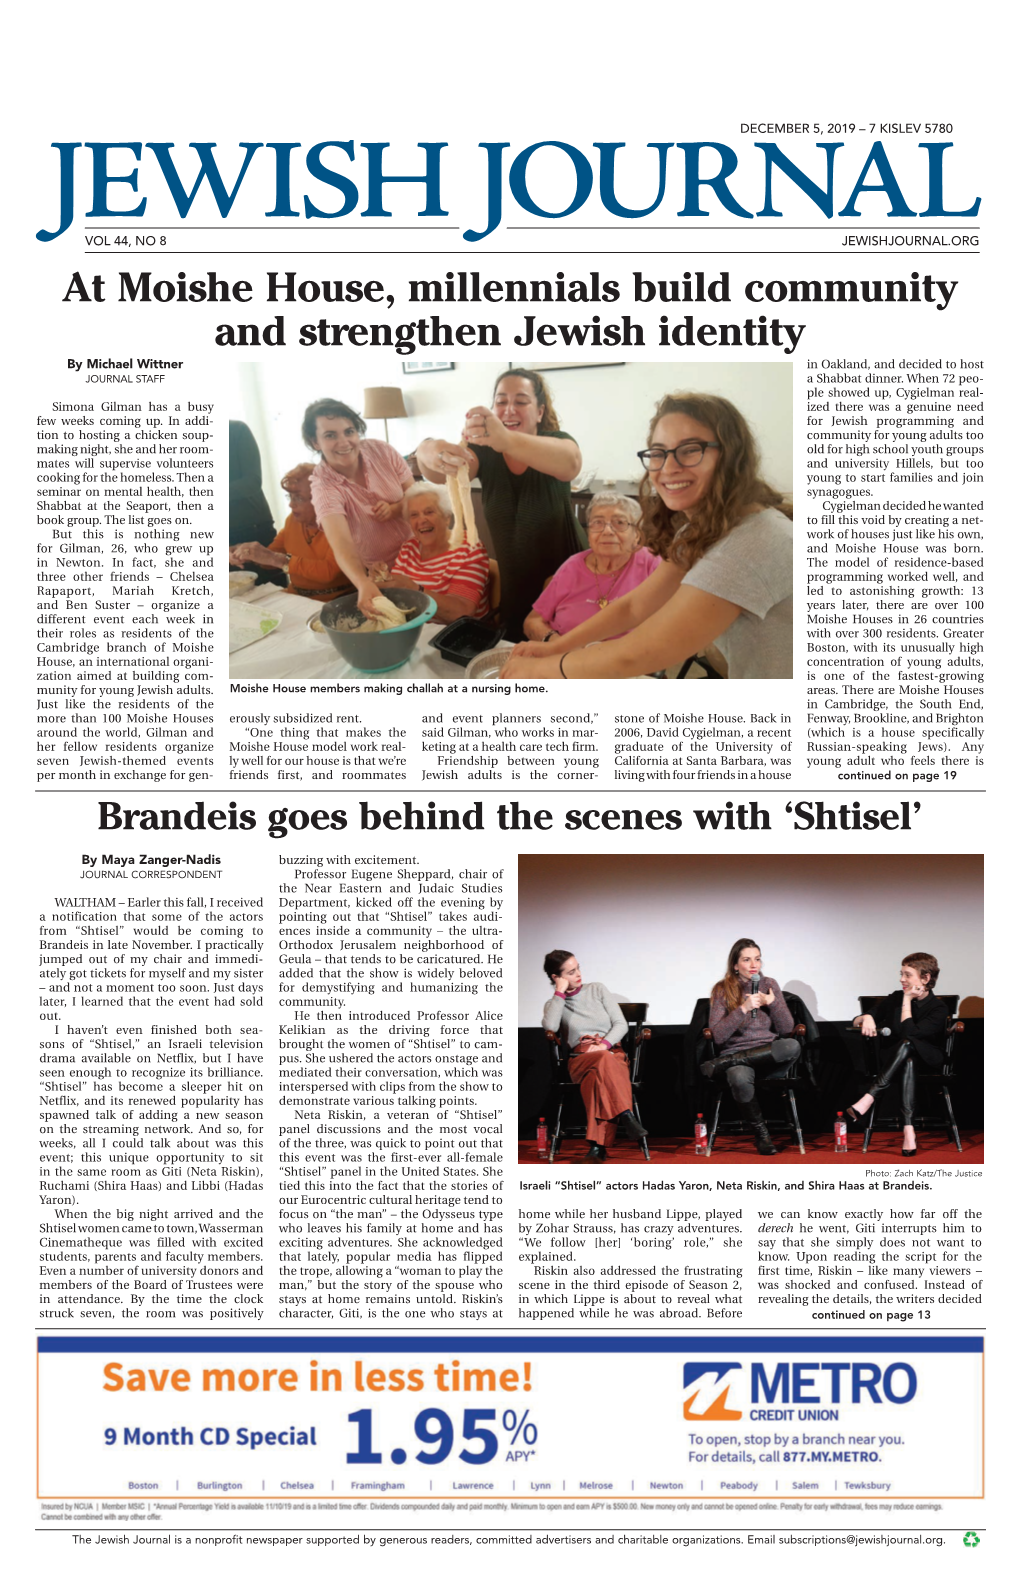 At Moishe House, Millennials Build Community and Strengthen Jewish Identity by Michael Wittner in Oakland, and Decided to Host JOURNAL STAFF a Shabbat Dinner